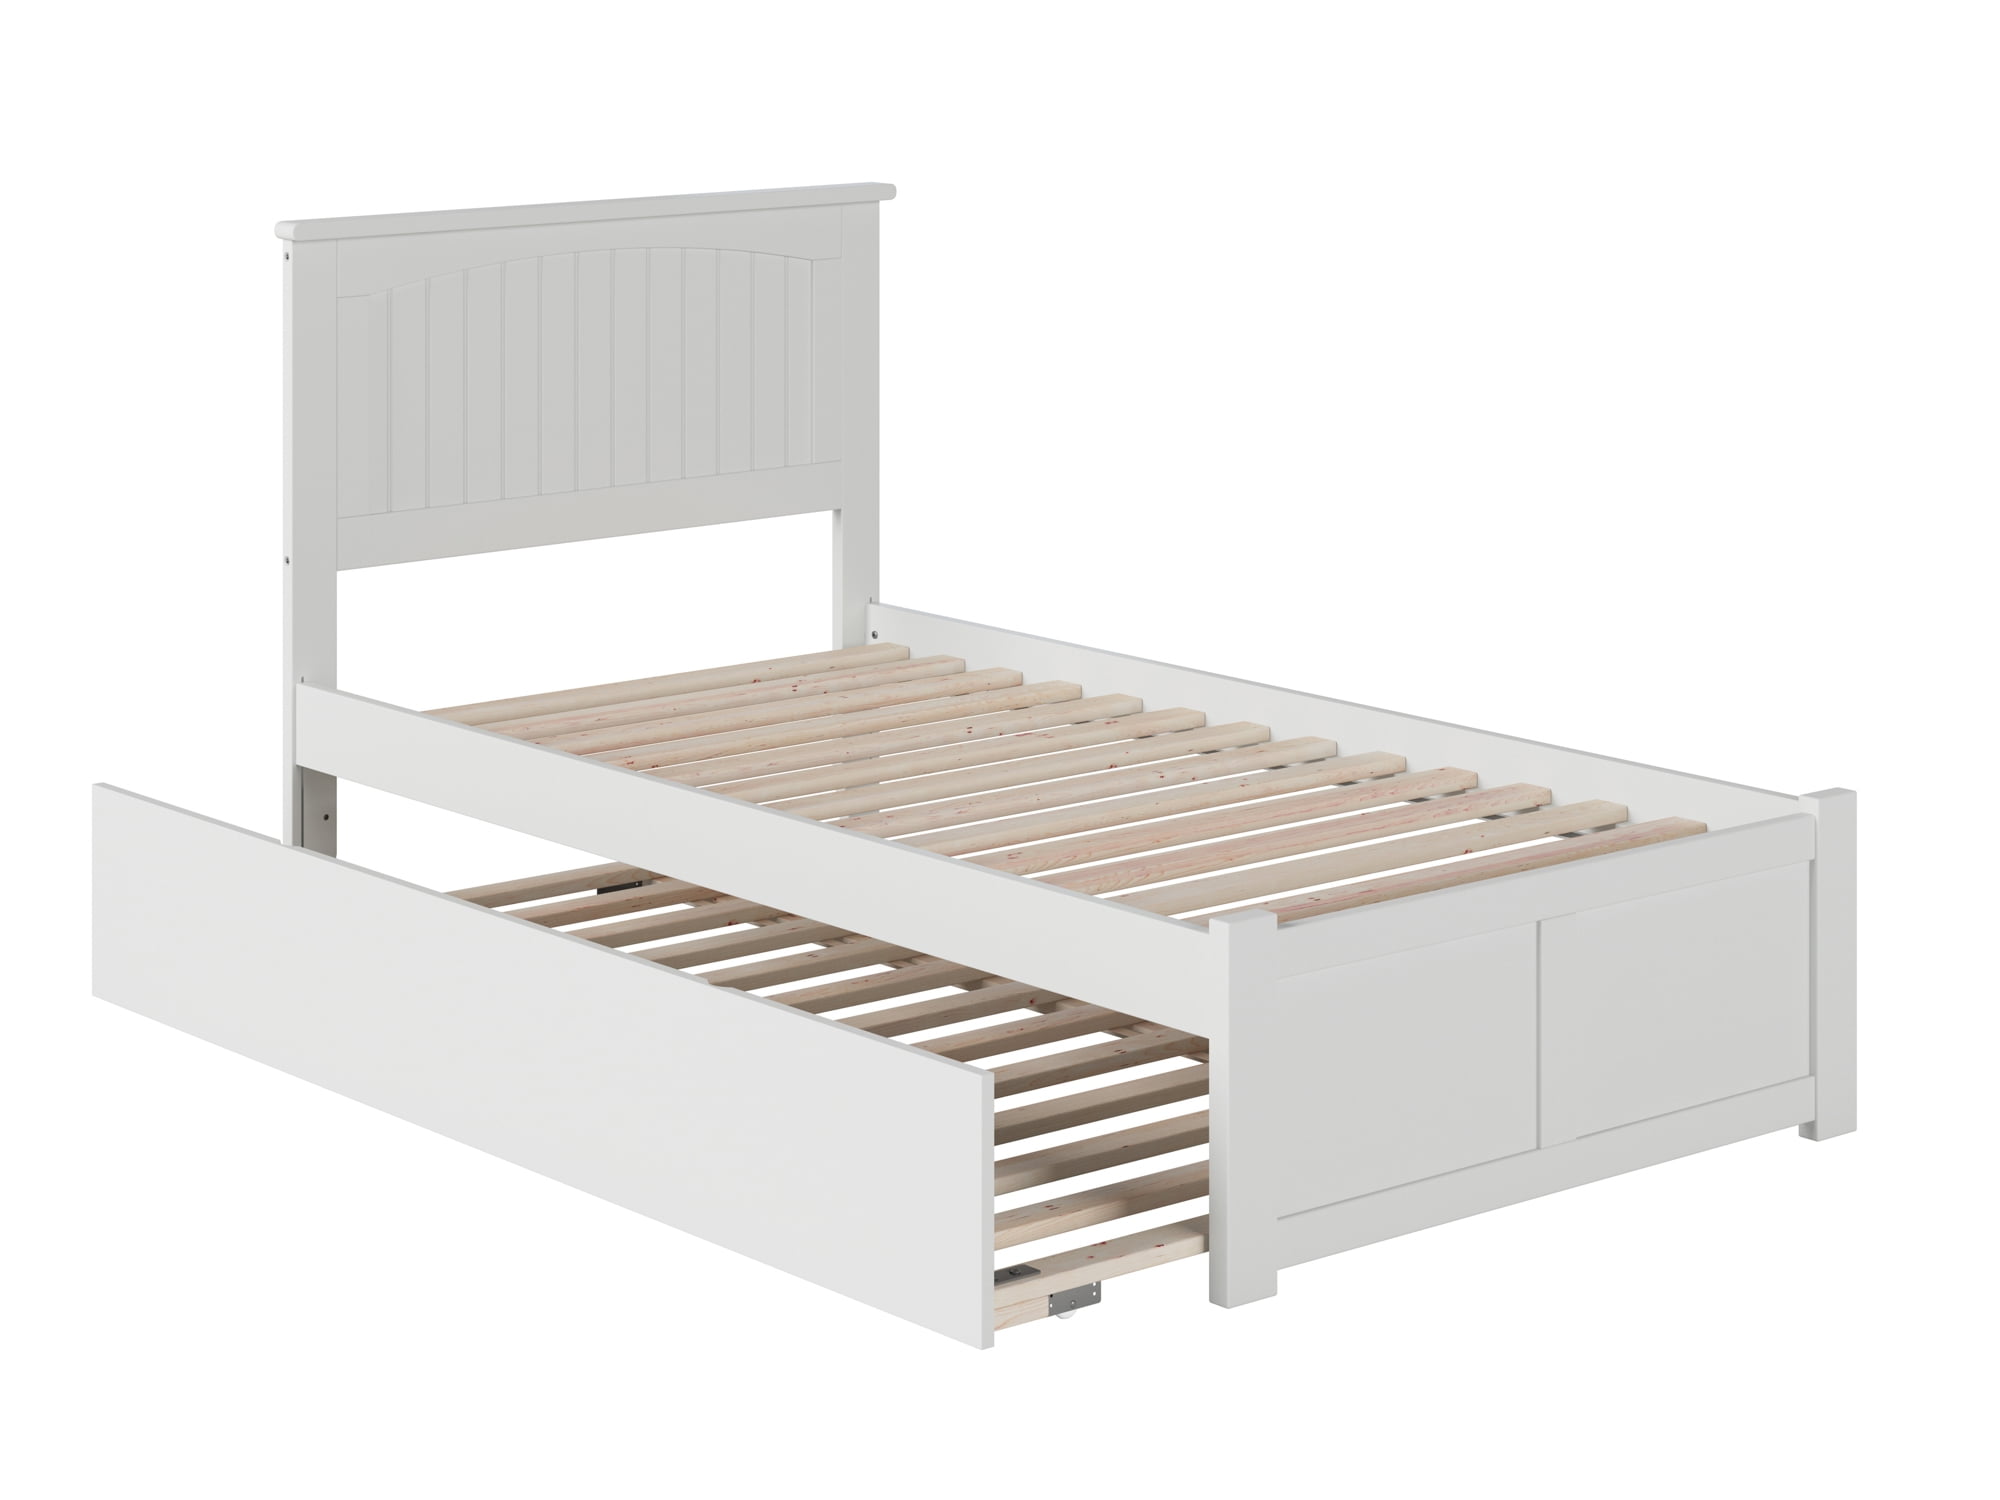 Picture of Atlantic Furniture AR8222012 Nantucket Panel Footboard & Urban Trundle, White - Twin